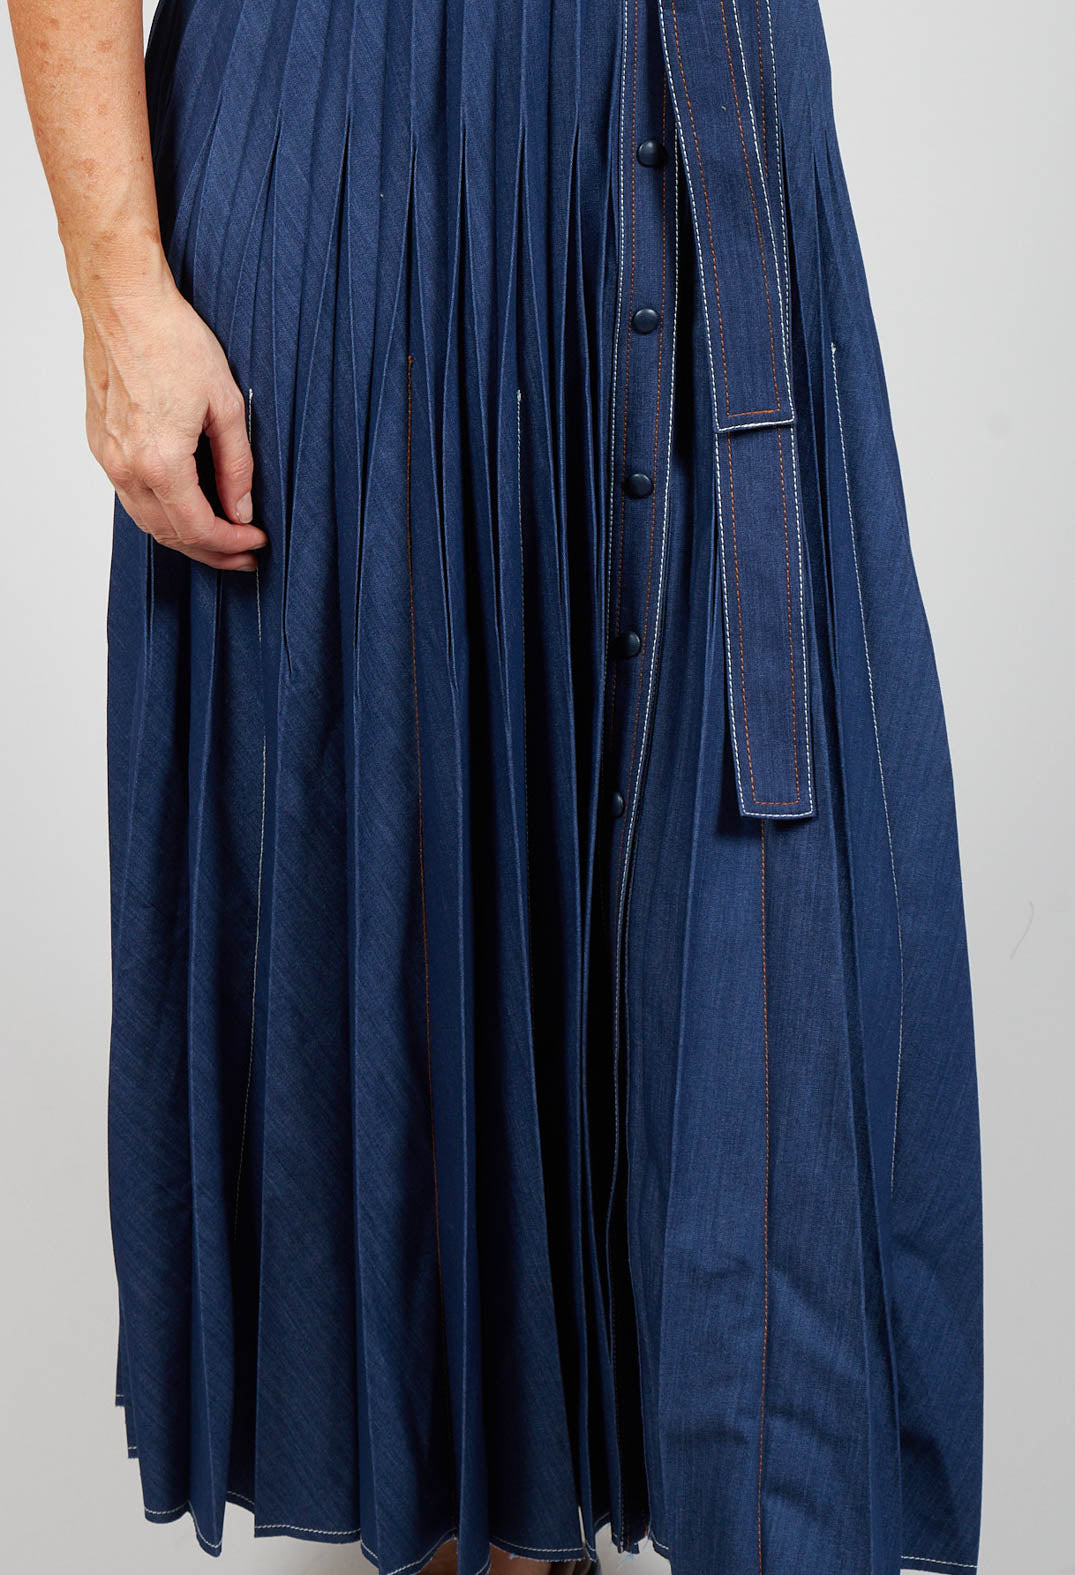 pleated dress detailing at the bottom